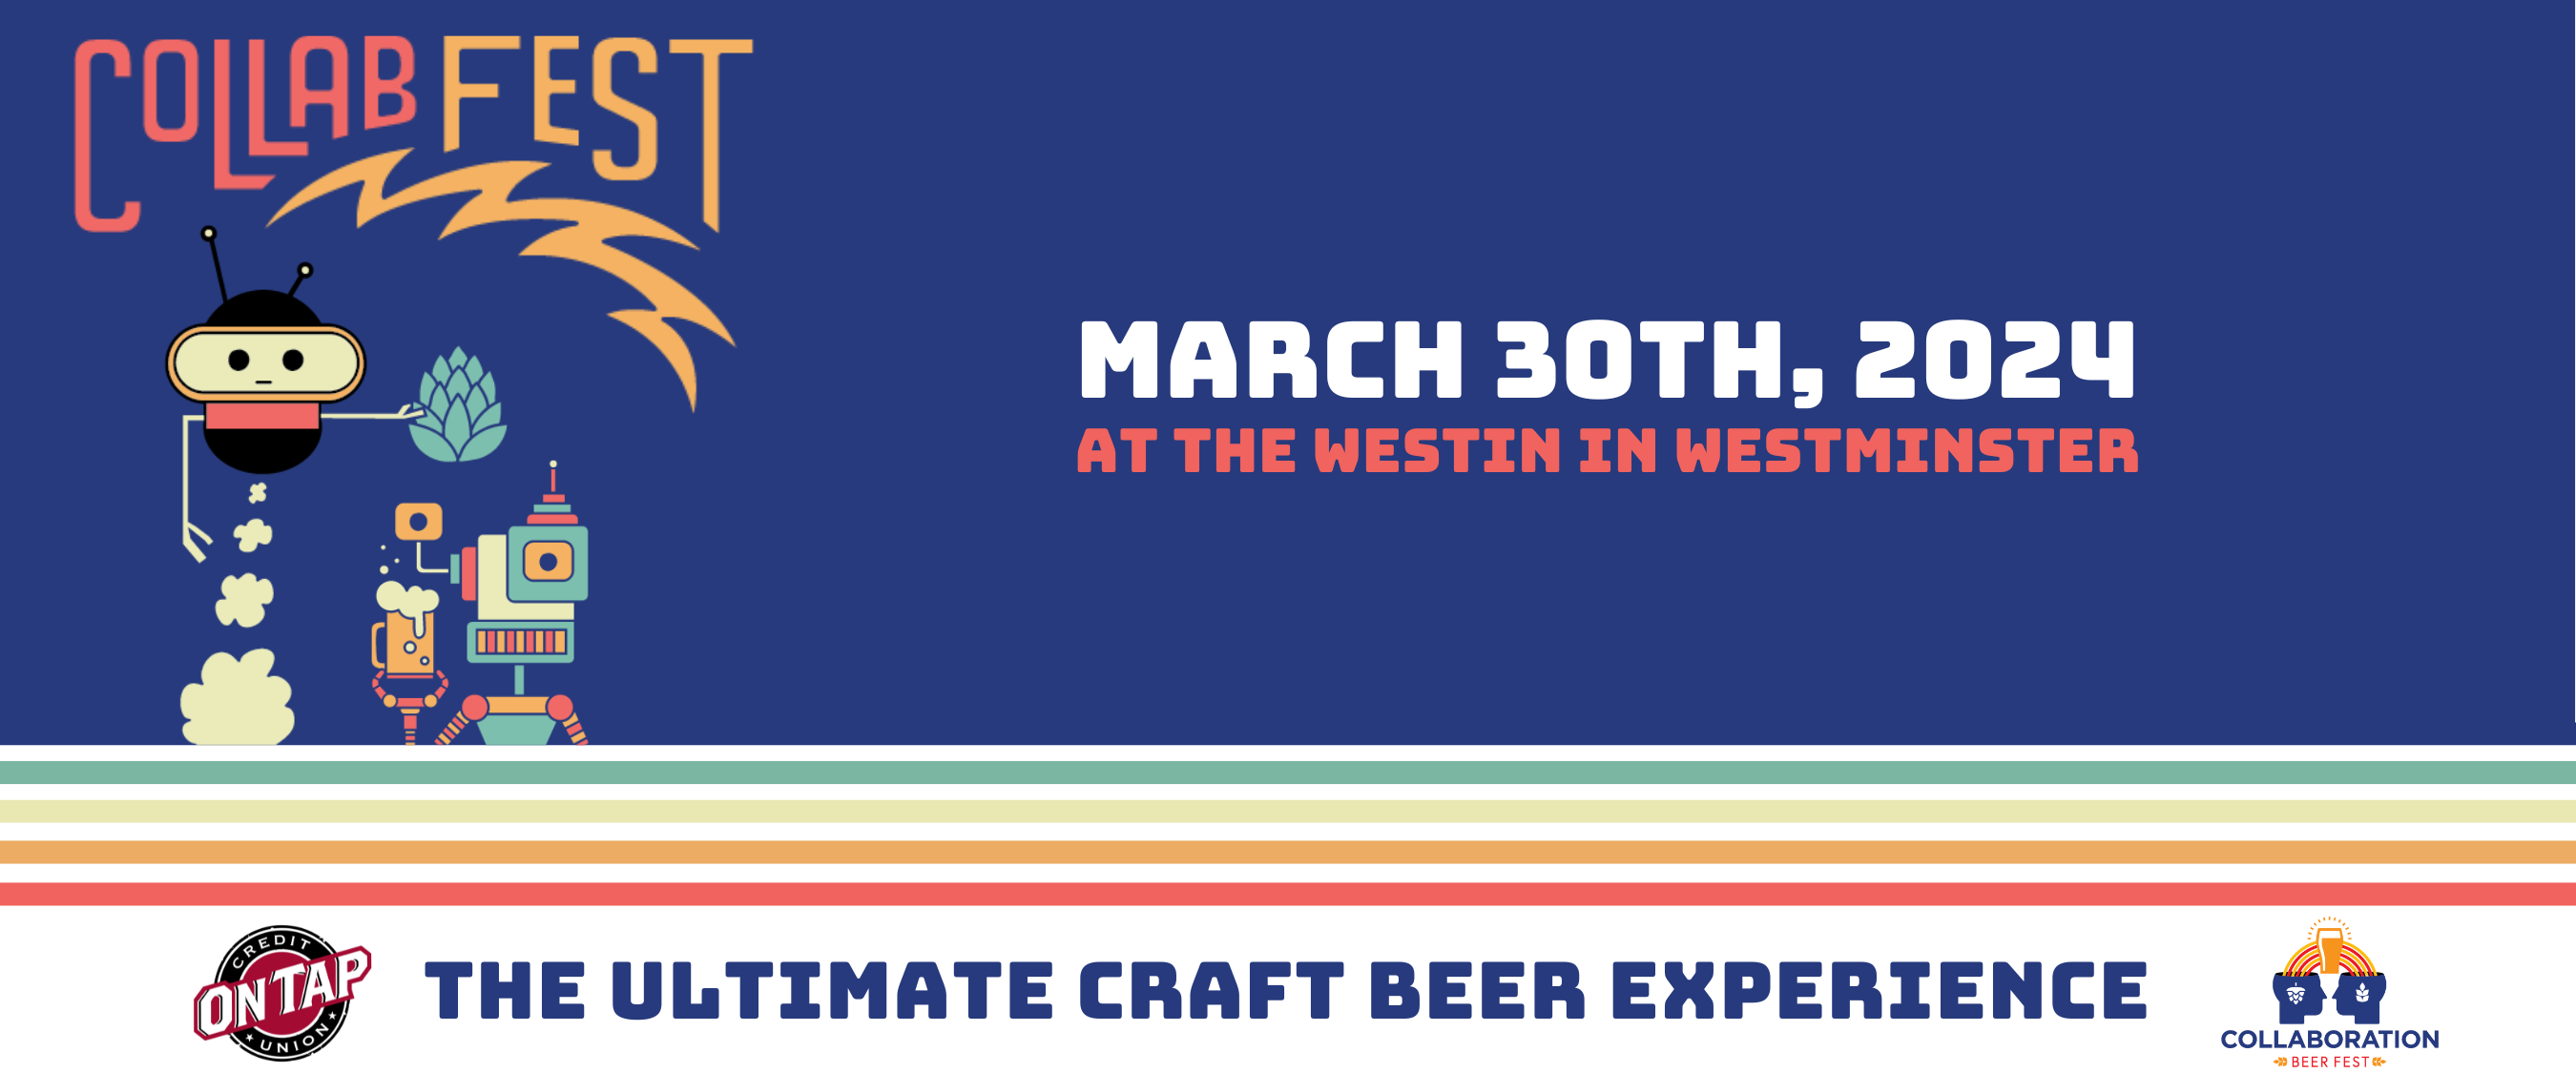 collaboration beer fest march 30th 2024